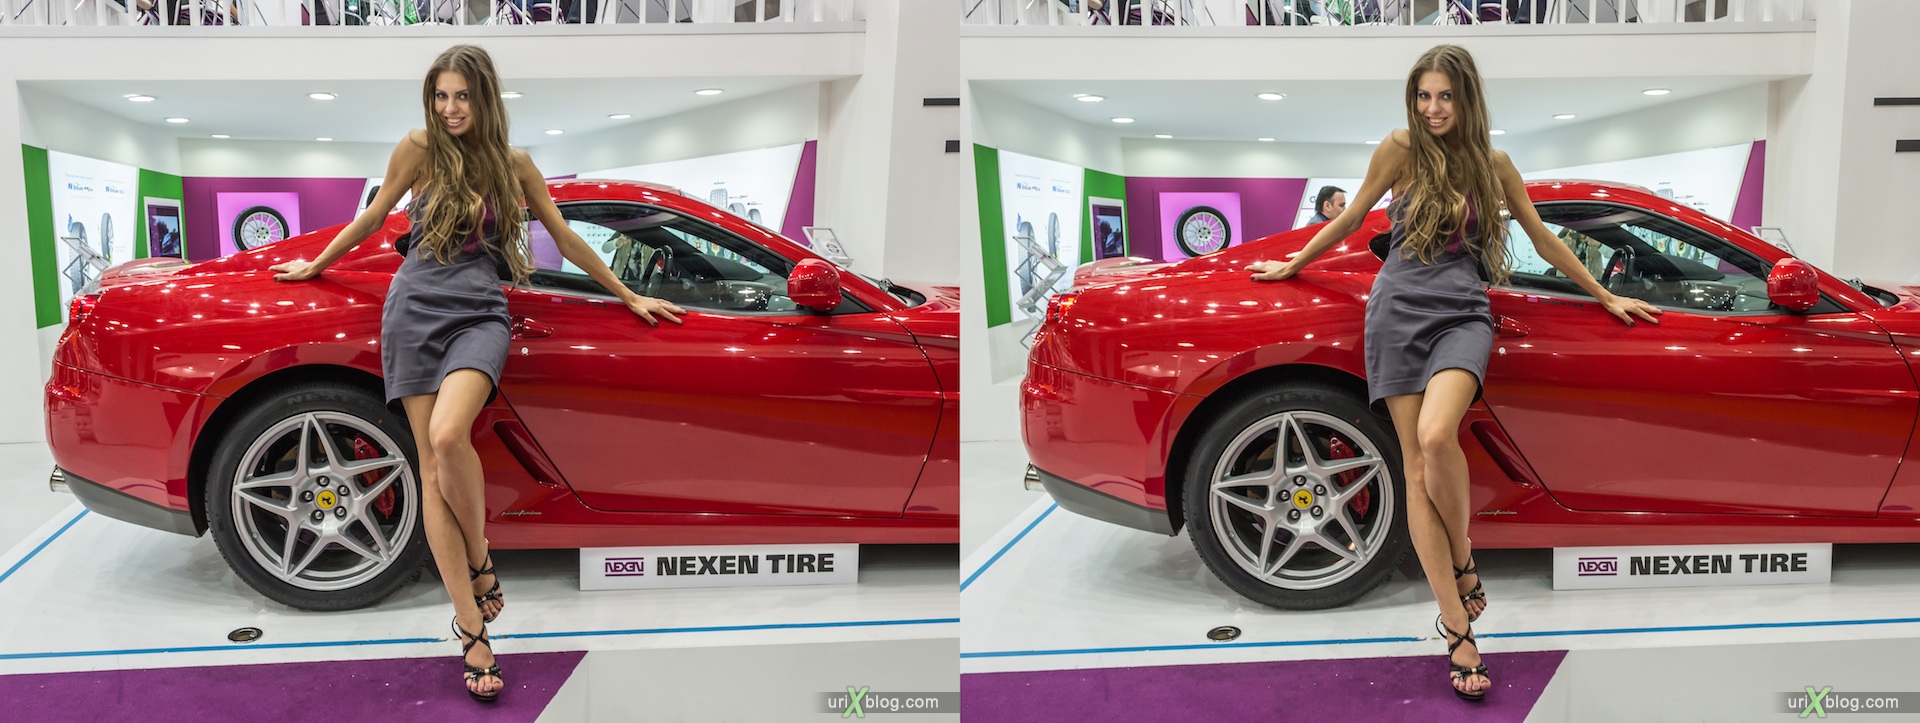 2012, girl, model, Moscow International Automobile Salon, auto show, 3D, stereo pair, cross-eyed, crossview